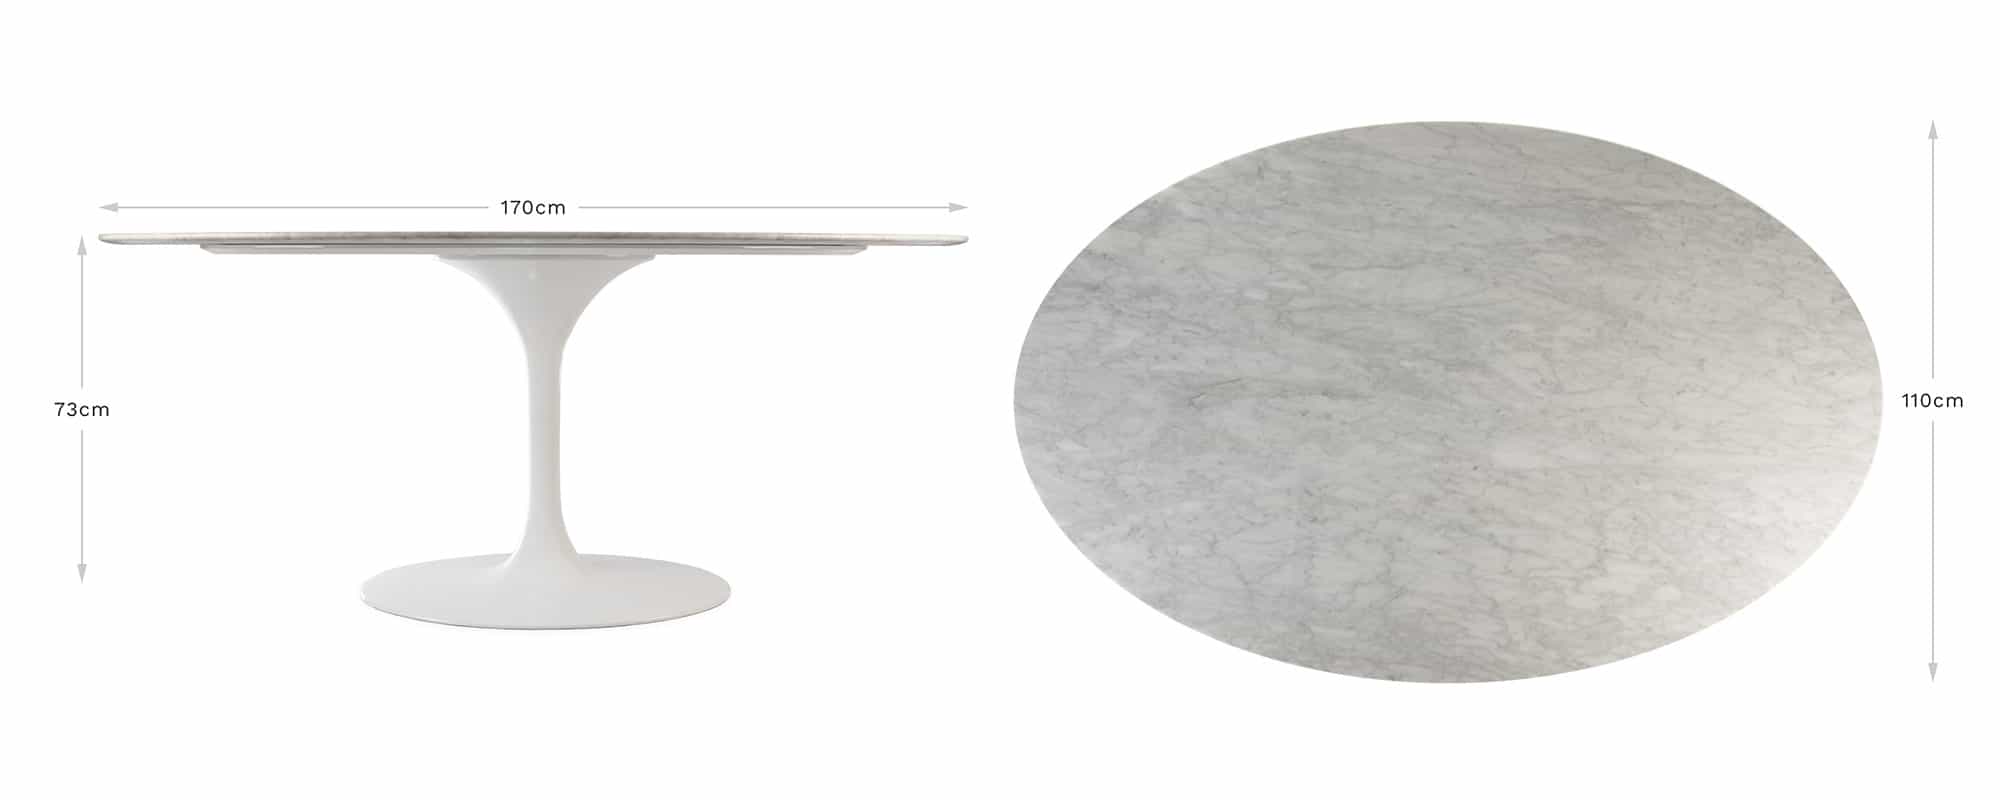 Our medium sized oval Tulip Tables are shown here against a clear white back ground with diagrammatic arrows and figures to visually show all dimensions